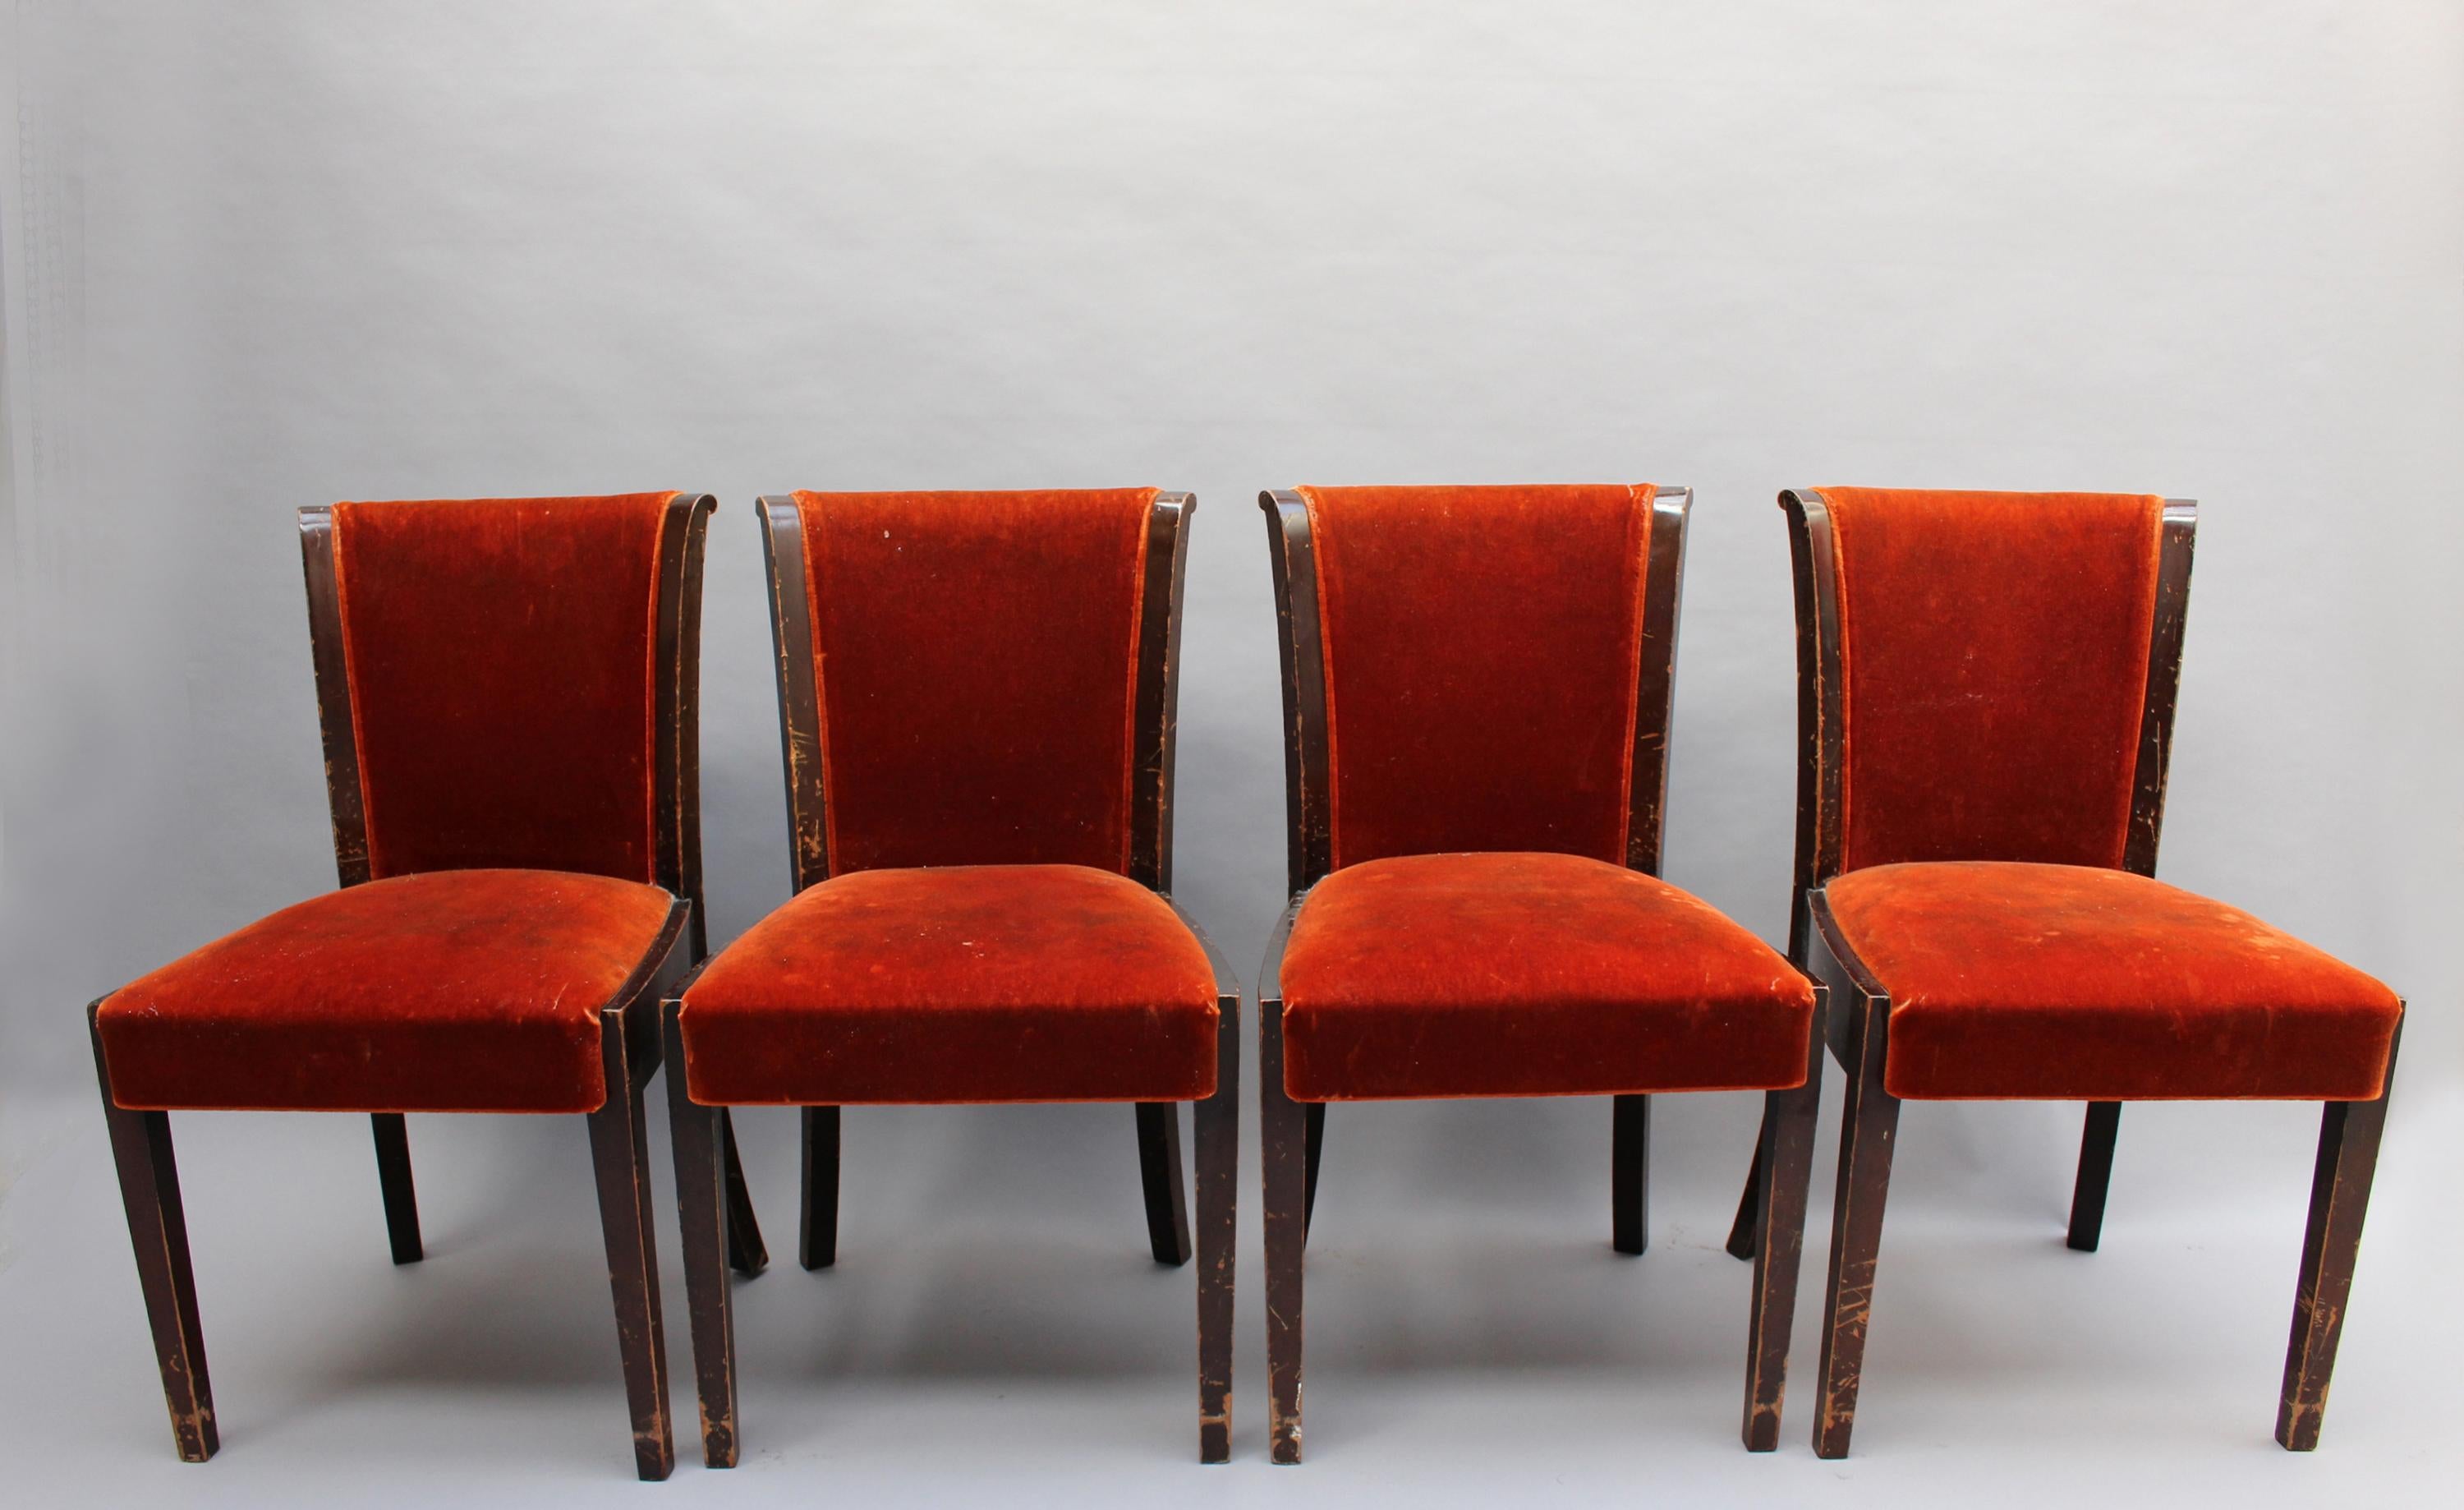 De Coene Freres: A set of six fine Belgium Art Deco dining chairs (model Rubens) composed of 4 side and 2 arm with a darkened mahogany frame, an upholstered front back rest and a rosewood veneered back back.

Documentation: 